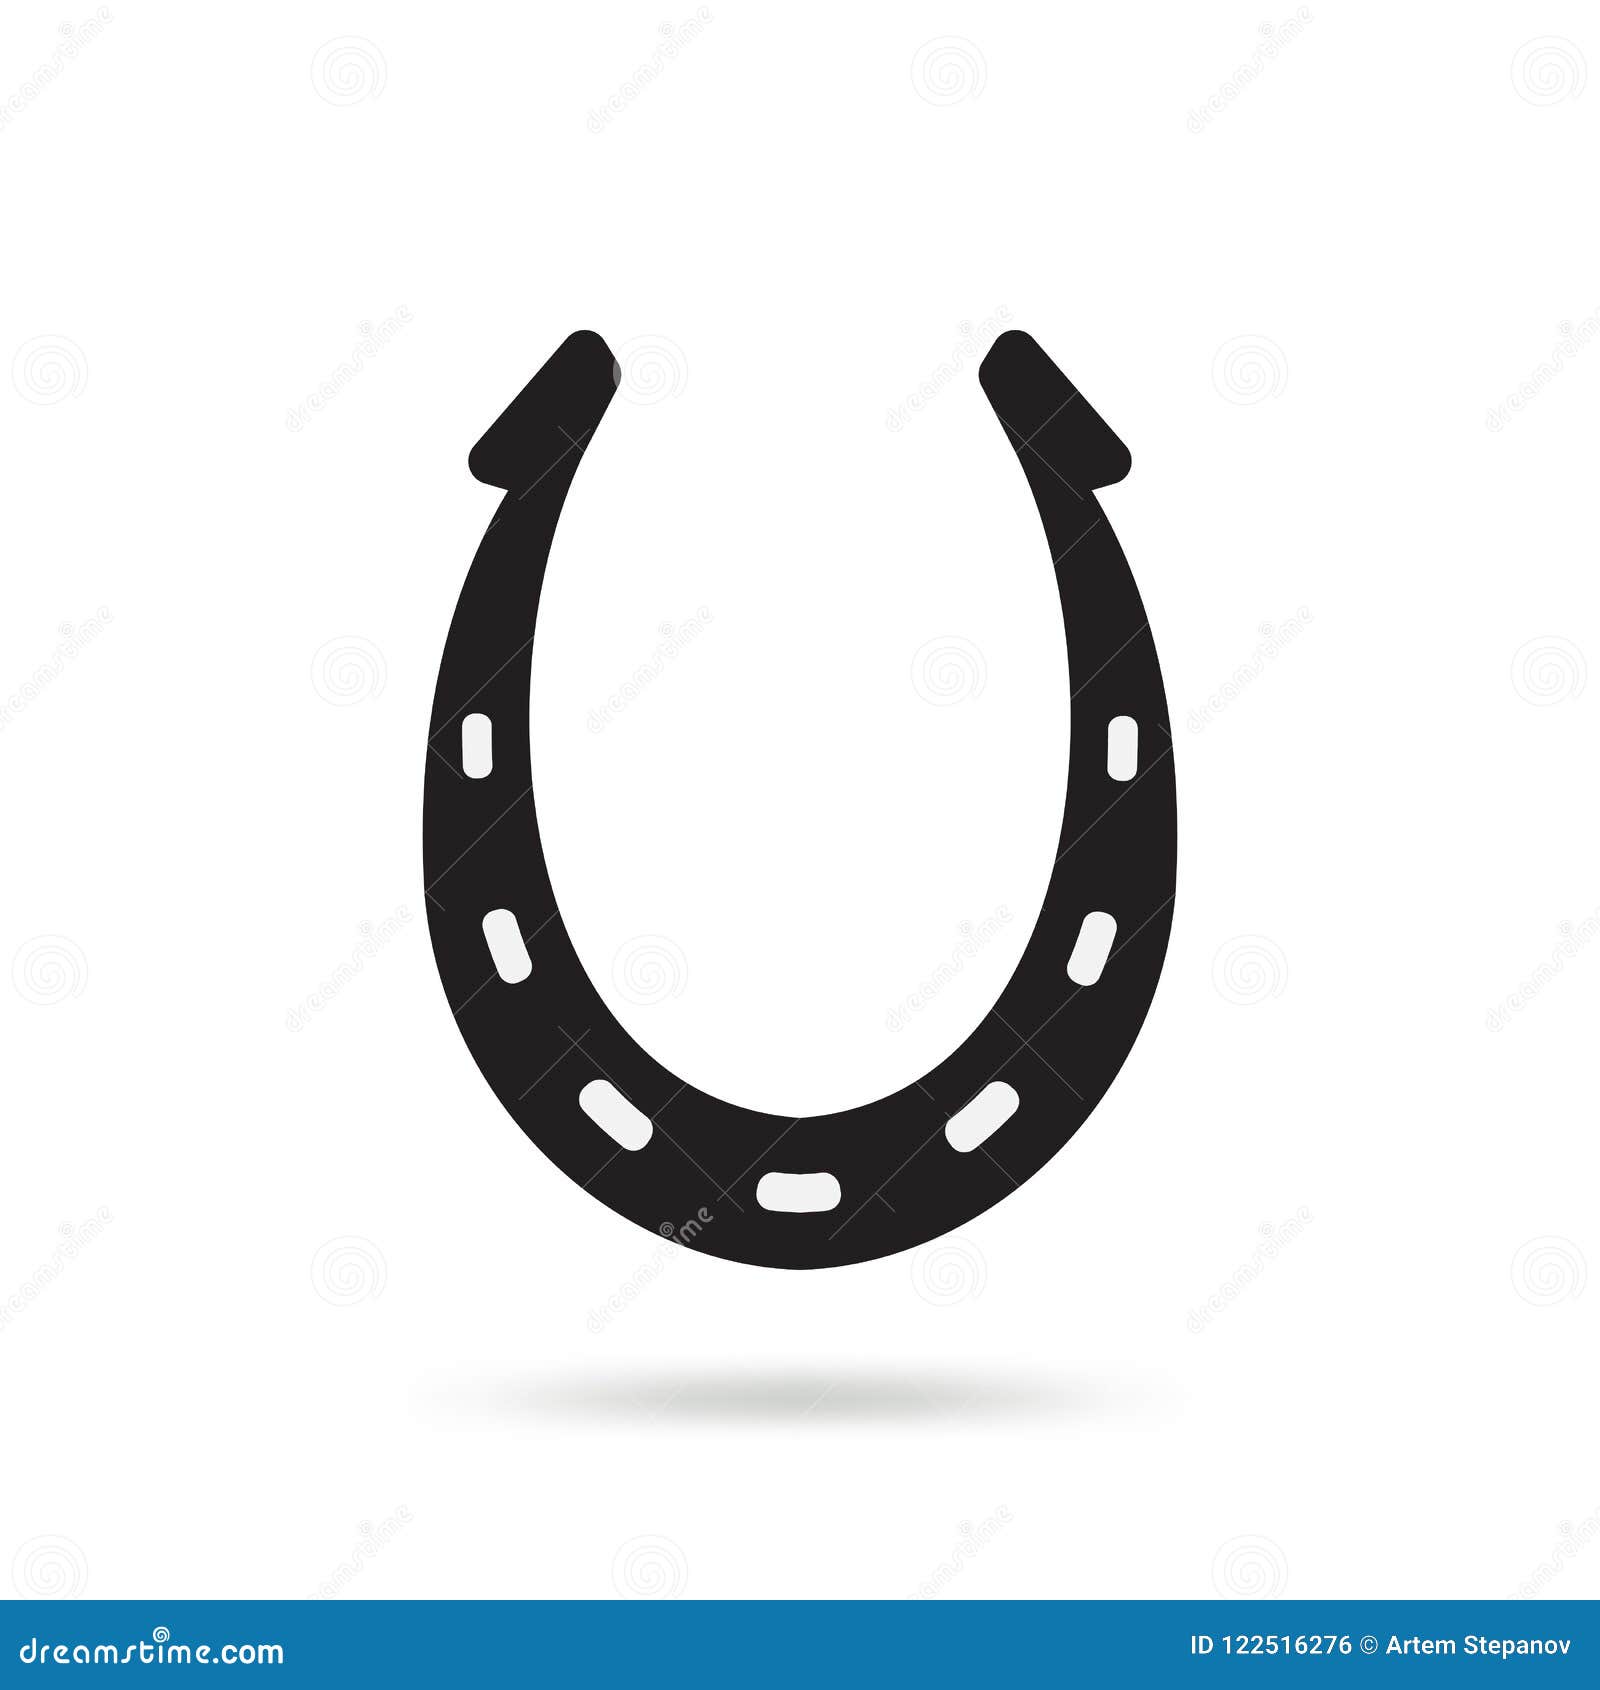 Horseshoe Outline Vector Images (over 5,900)